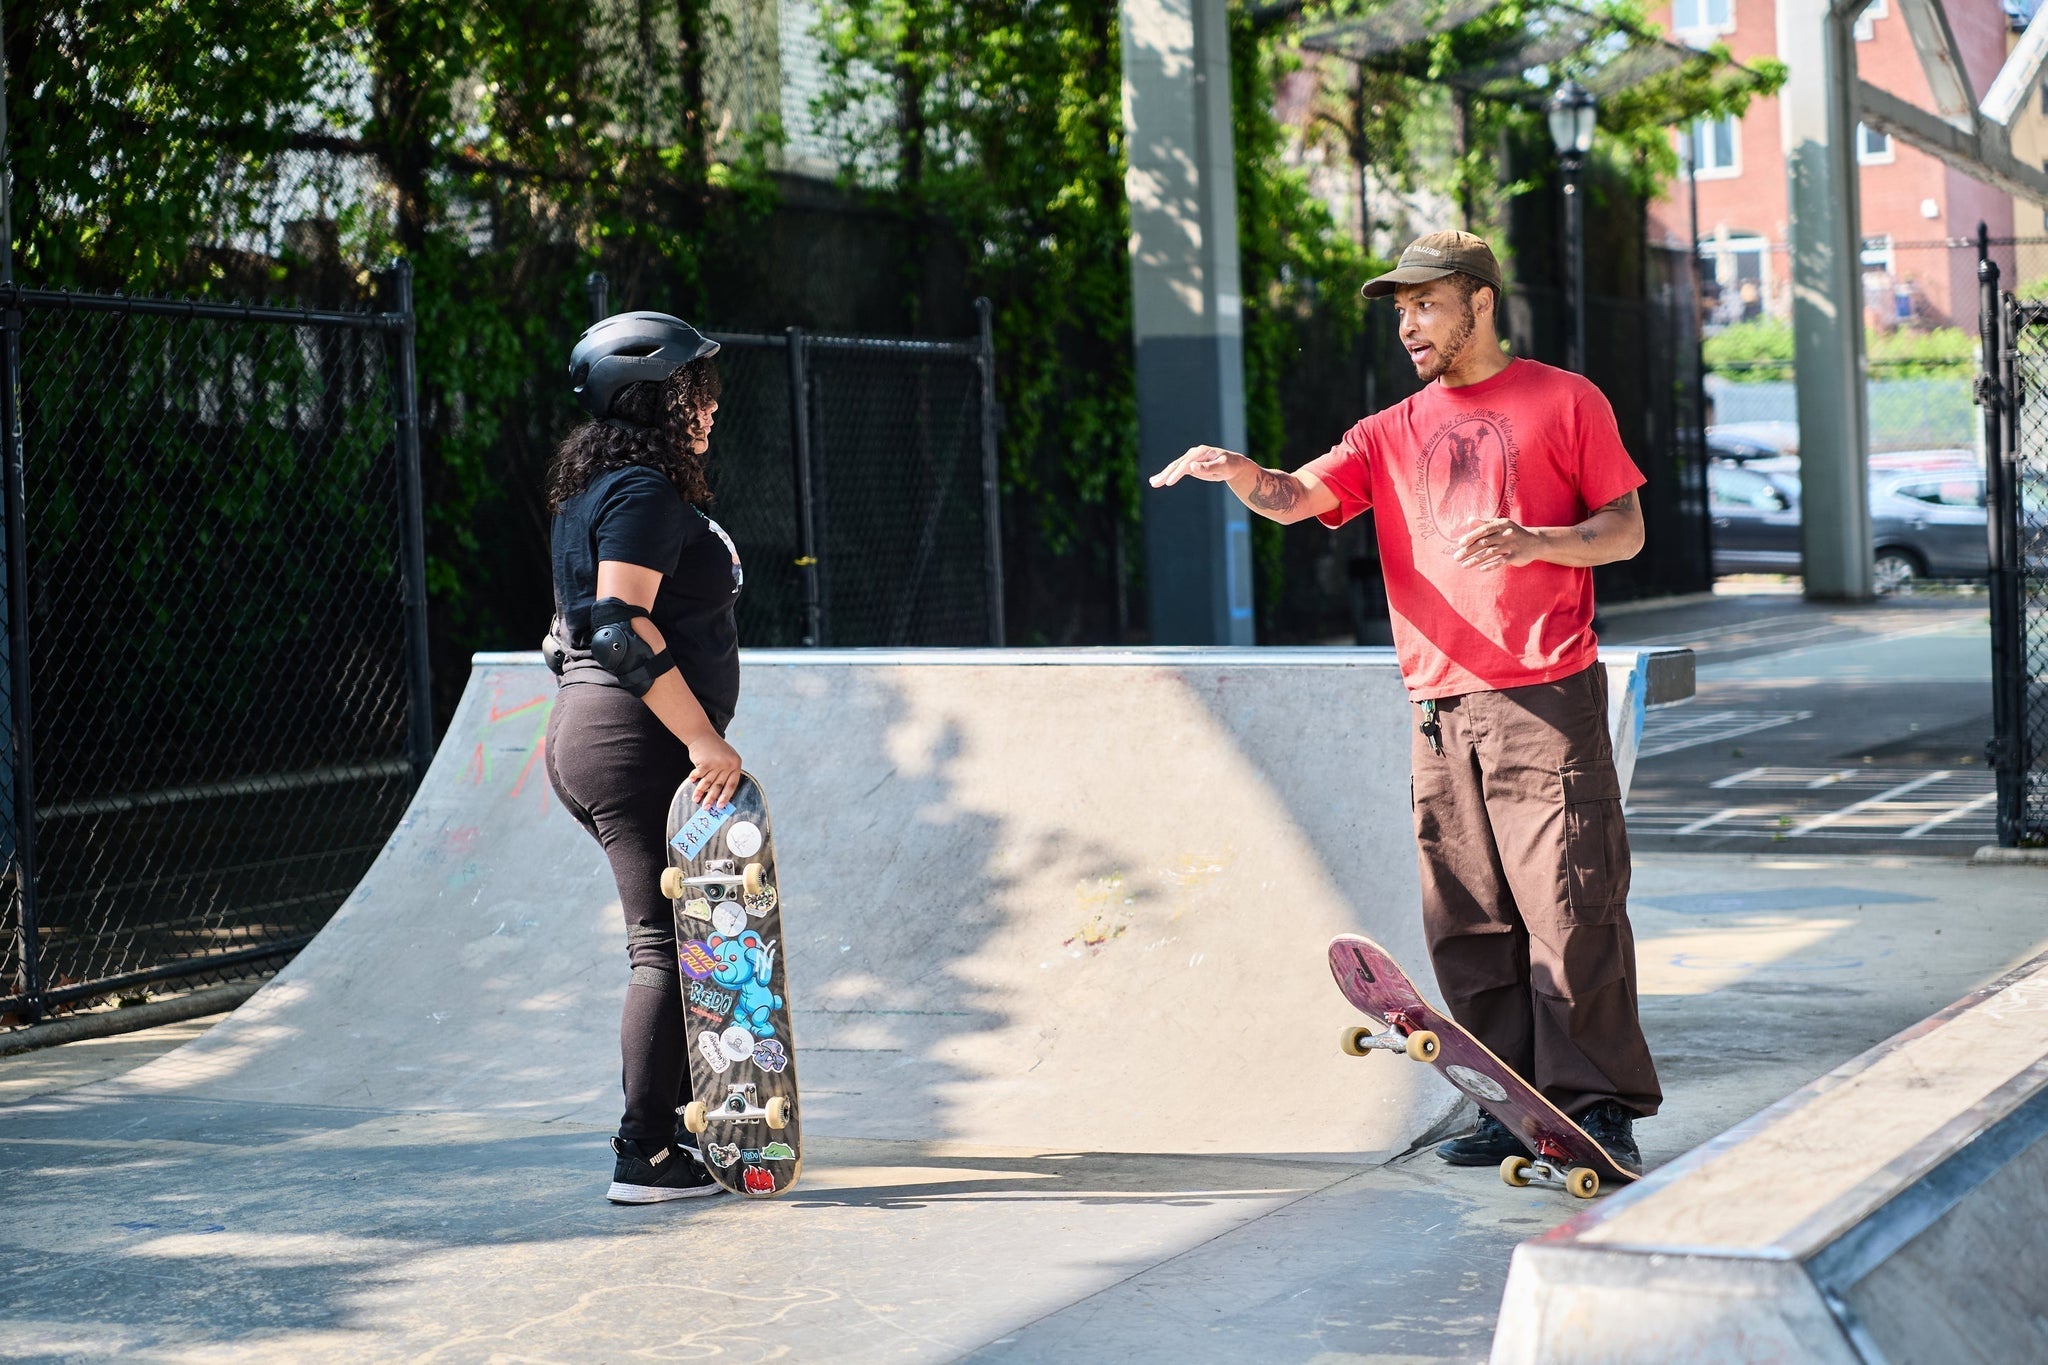 After School Skateboard Lessons @ St. Mary's Playground (April 29 - May 3)